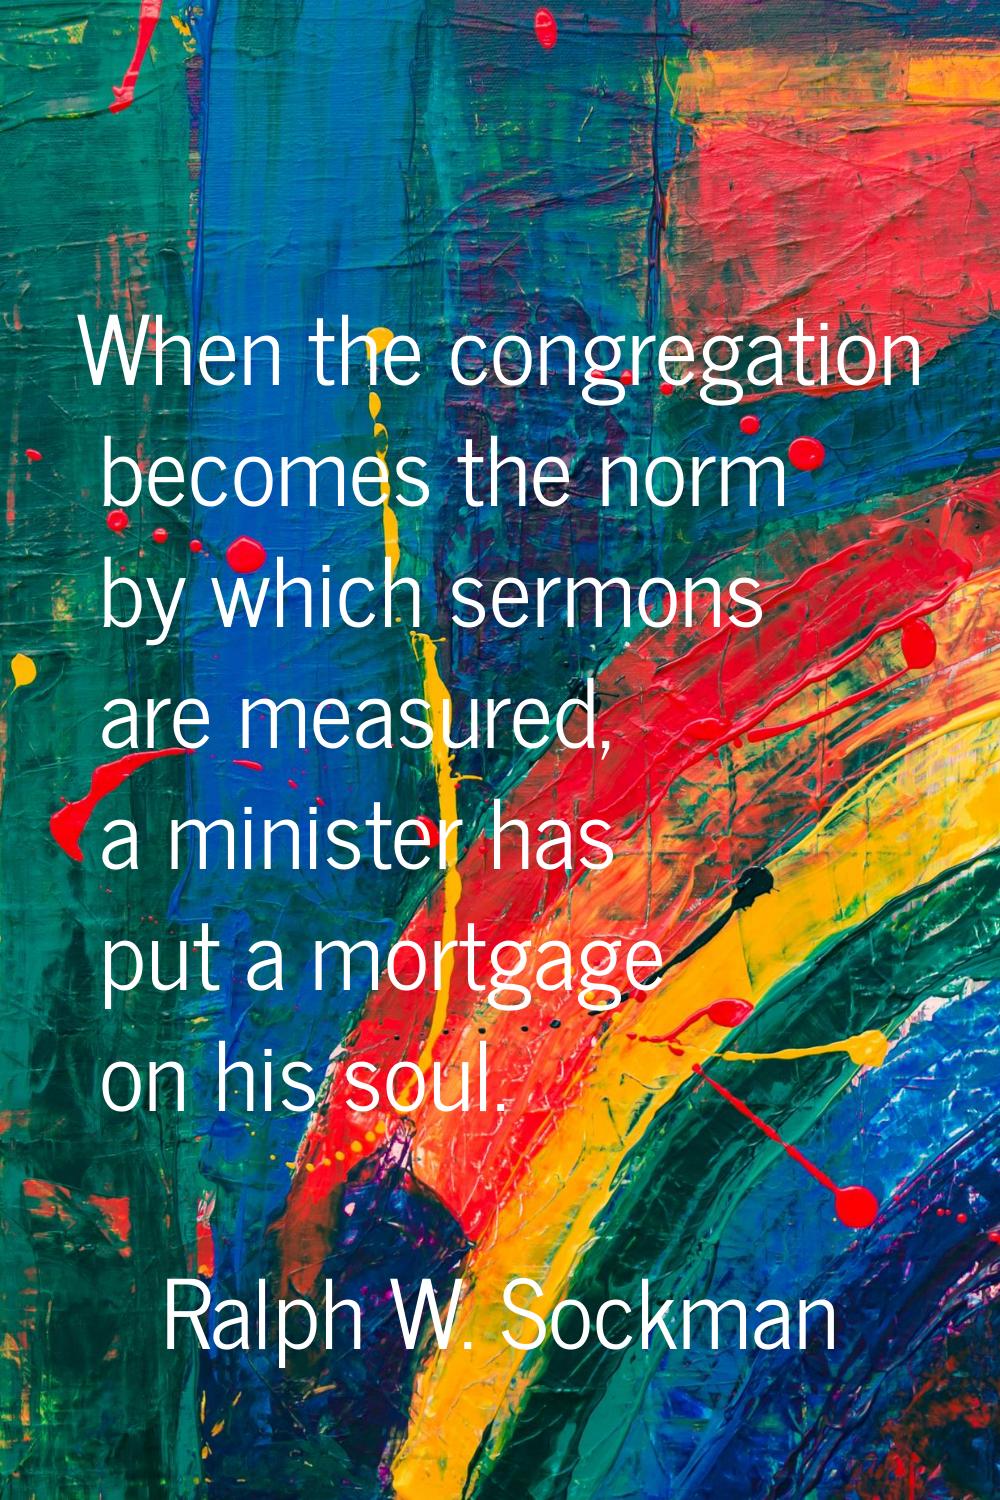 When the congregation becomes the norm by which sermons are measured, a minister has put a mortgage